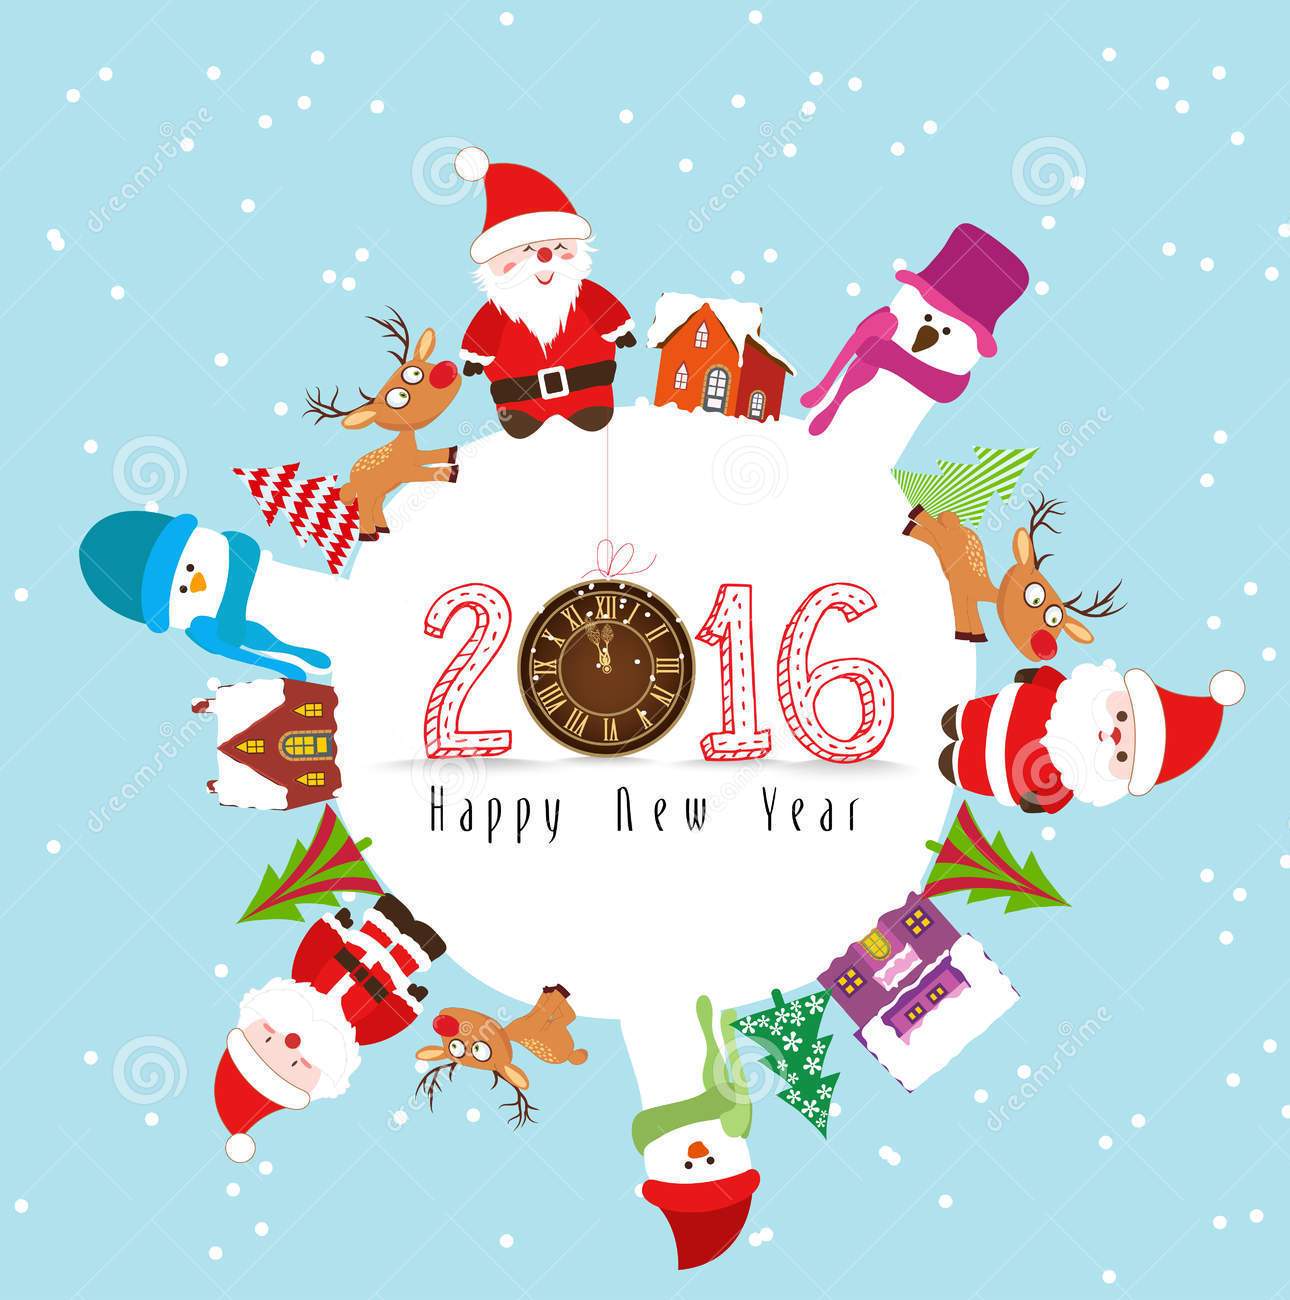 Happy New Year 2016 Images pictures wallpapers (8)